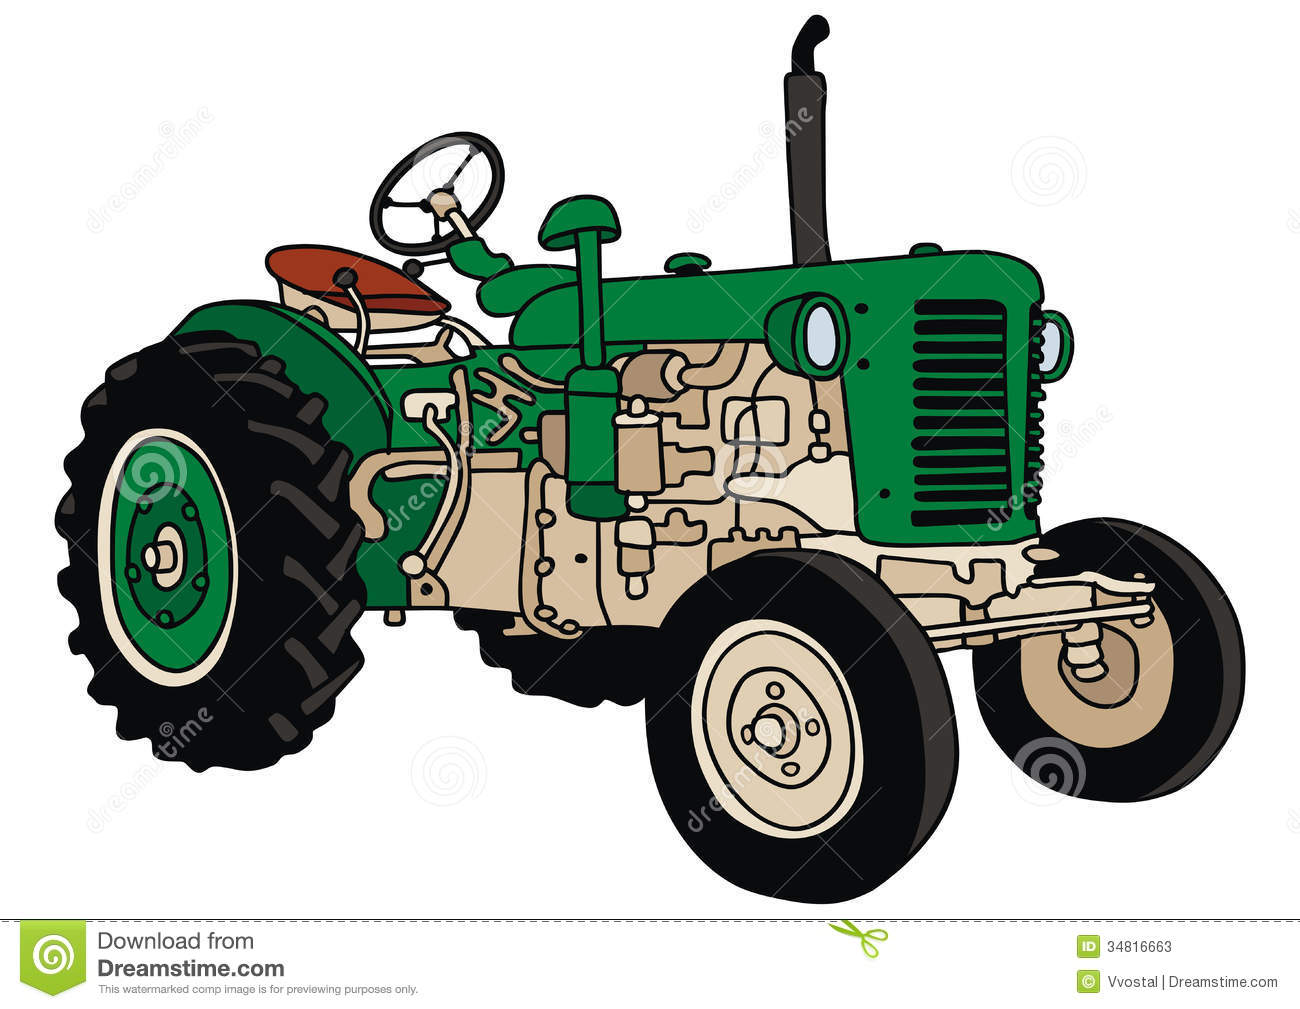 Tractor Stock Photos   Image  34816663